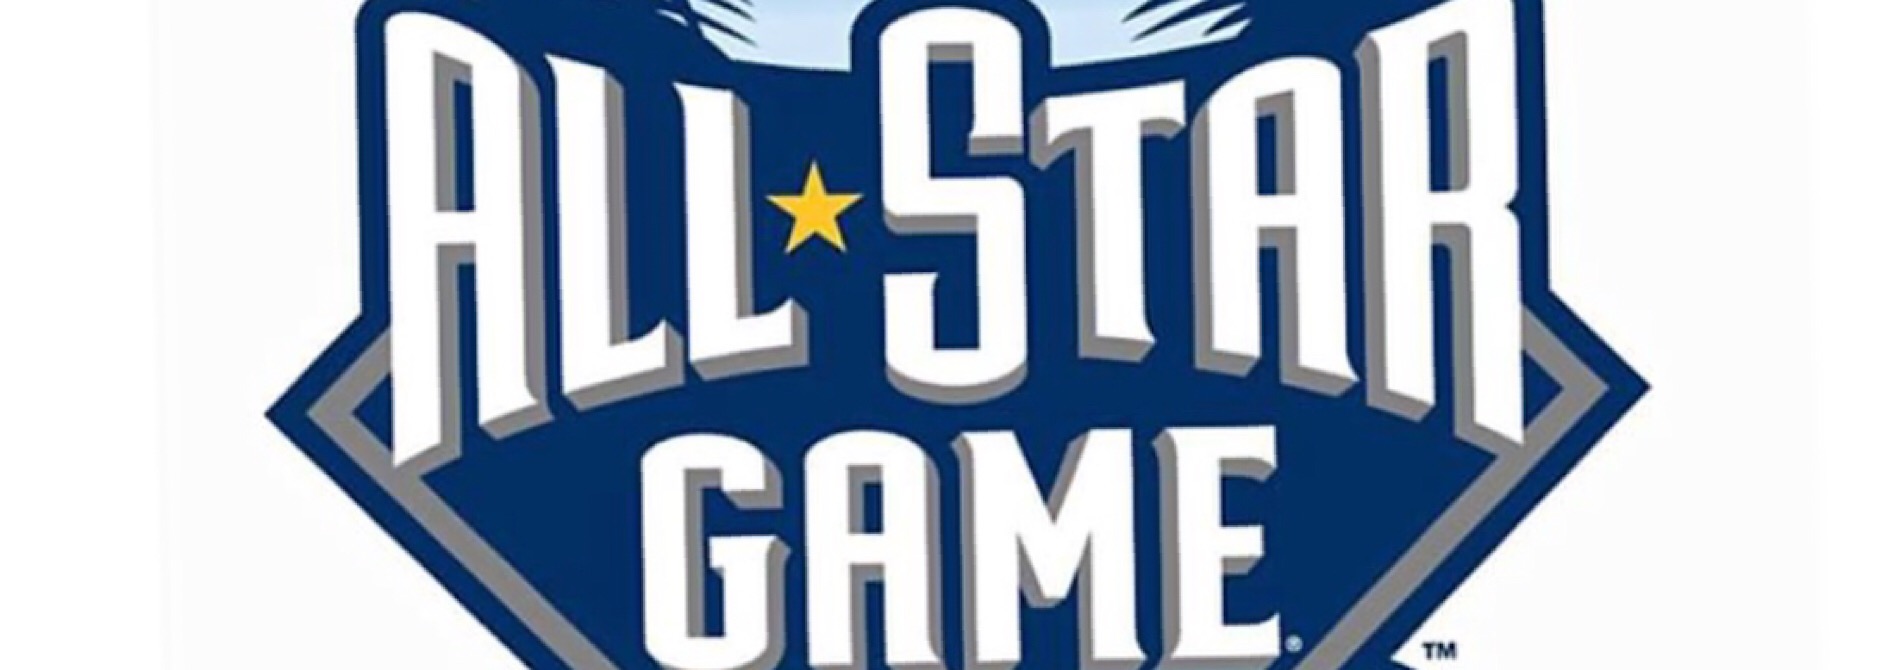 mil all stare game logo 2016